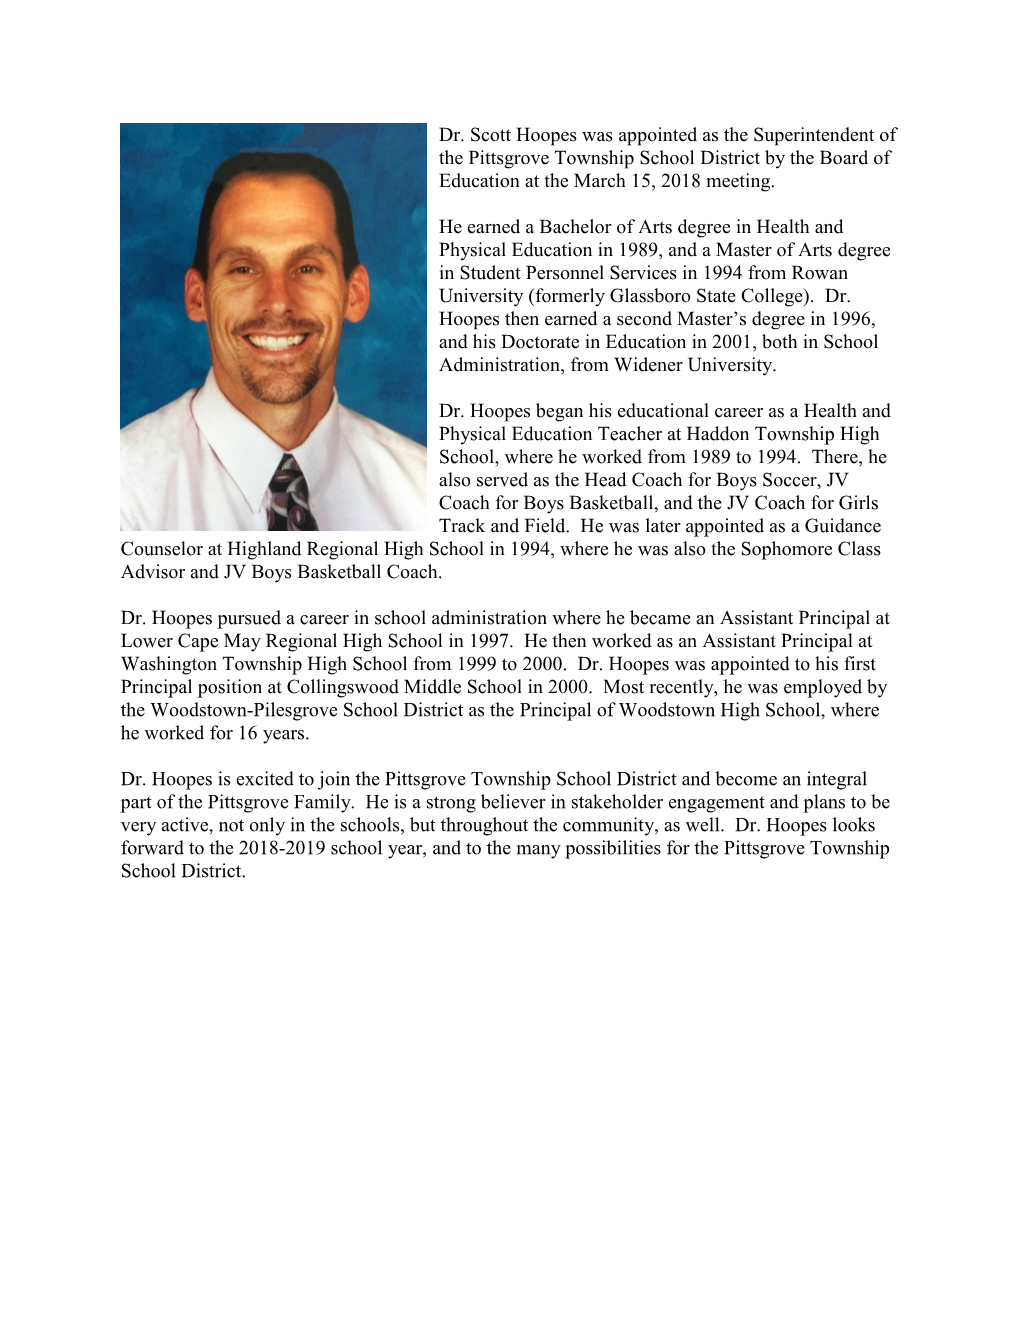 Dr. Scott Hoopes Was Appointed As the Superintendent of the Pittsgrove Township School District by the Board of Education at the March 15, 2018 Meeting